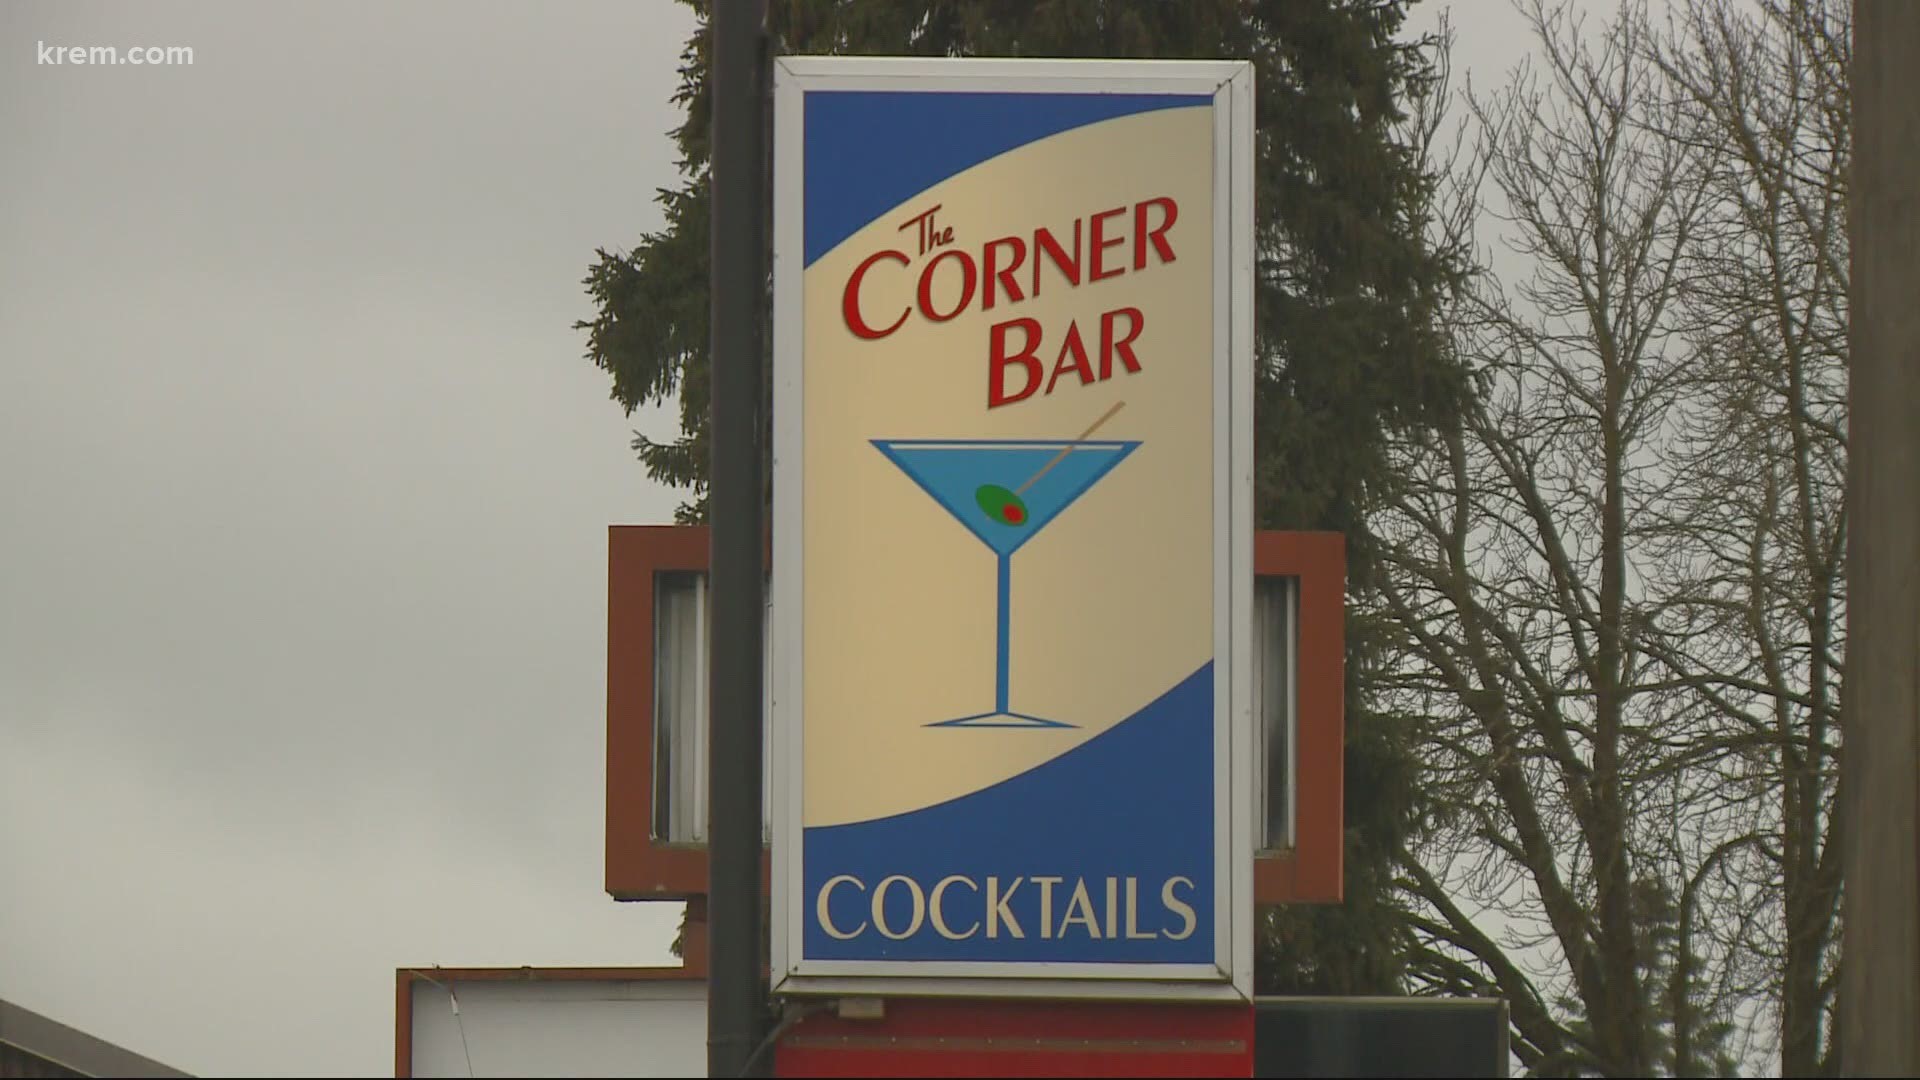 Almost a week after the Coeur d'Alene police chief mentioned Washington residents being a part of the uptick crime, a downtown bar is cracking down.